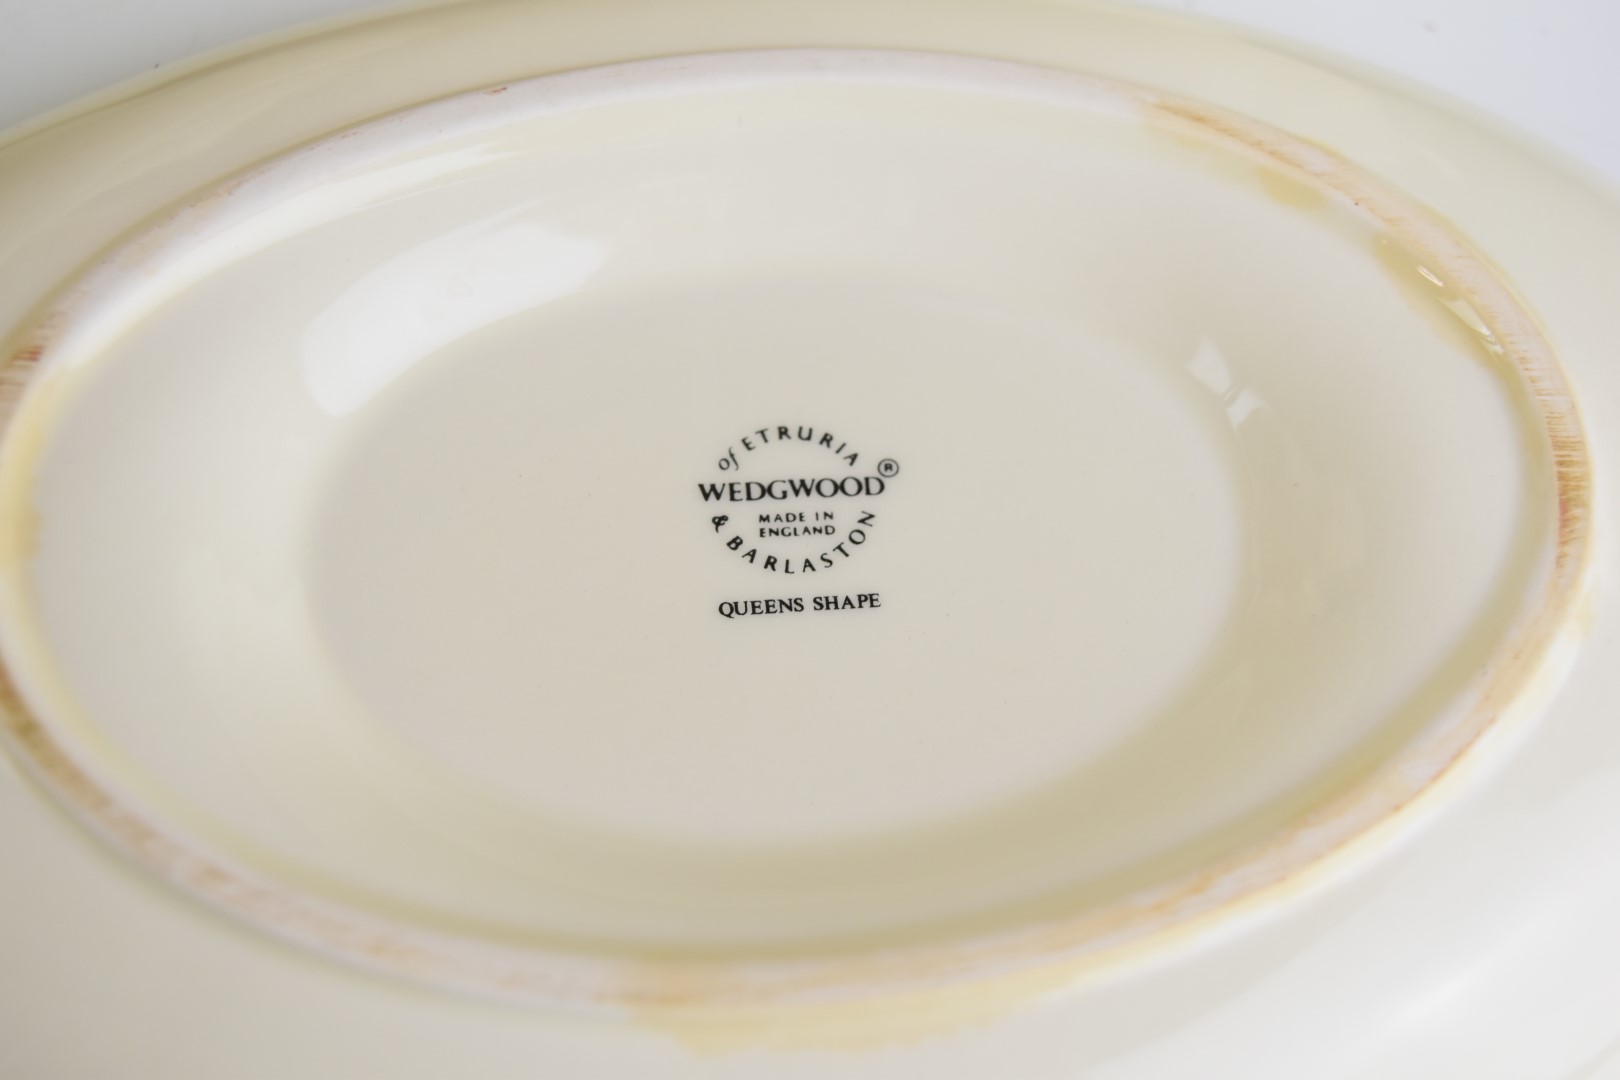 Wedgwood creamware extensive dinner service in Queen's Plane and Queen's Shape patterns (appear - Image 5 of 5